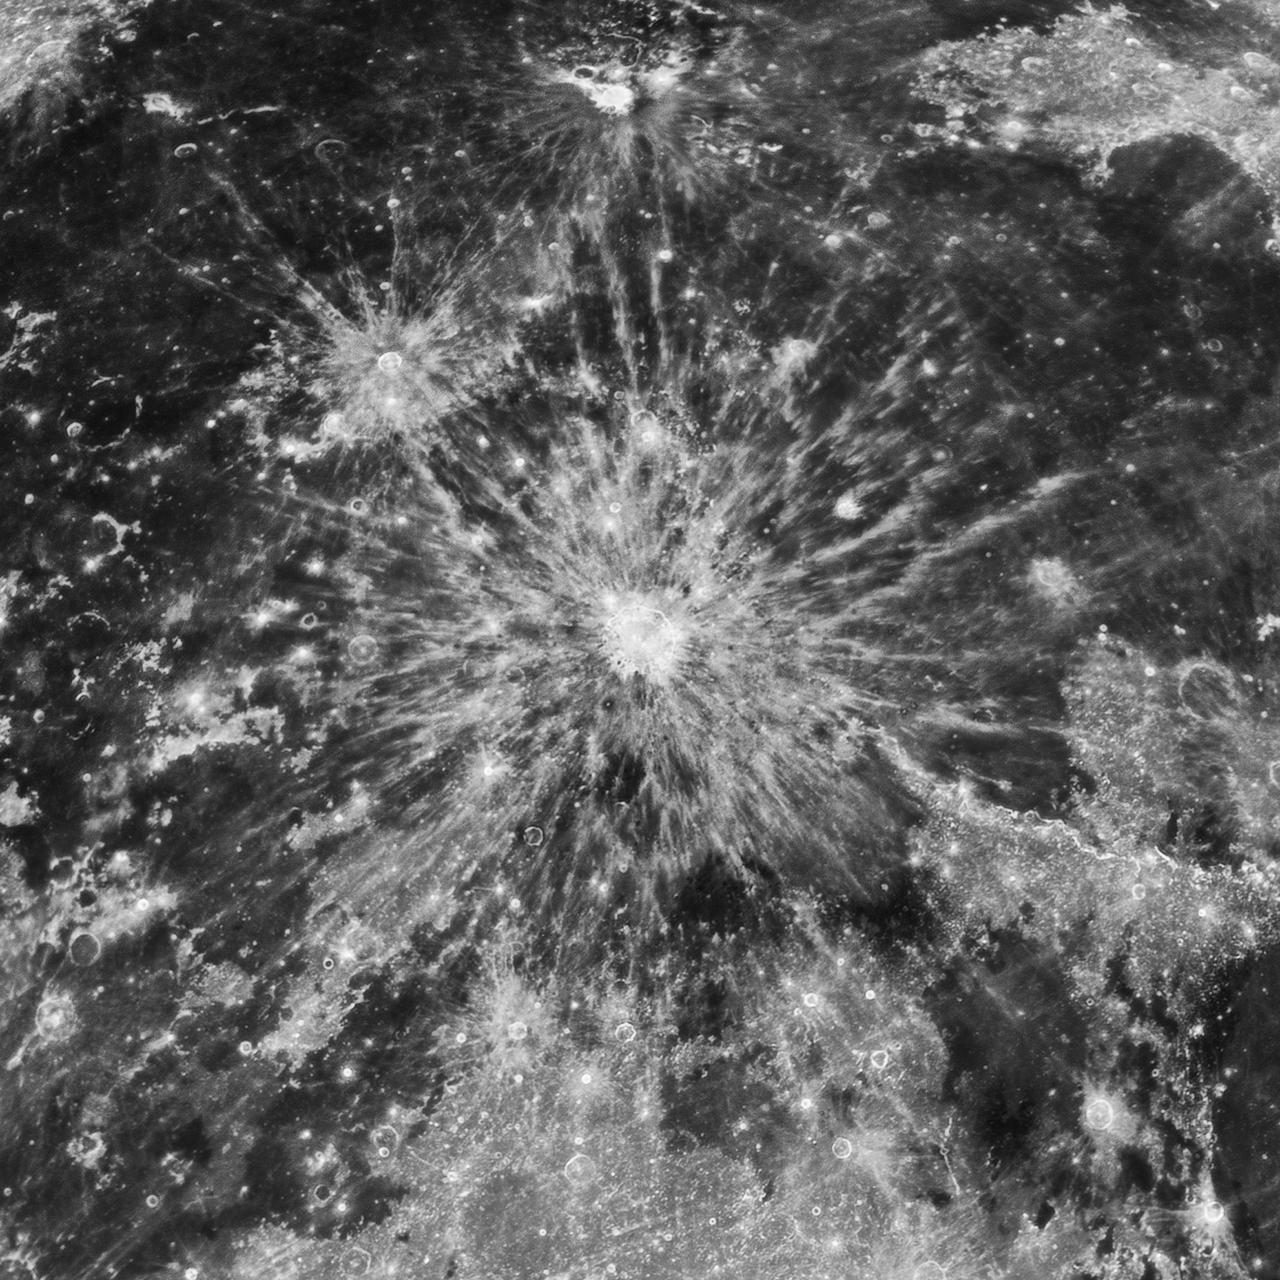 A black and white photo of the Moon's surface, focusing on a star-shaped meteor crater